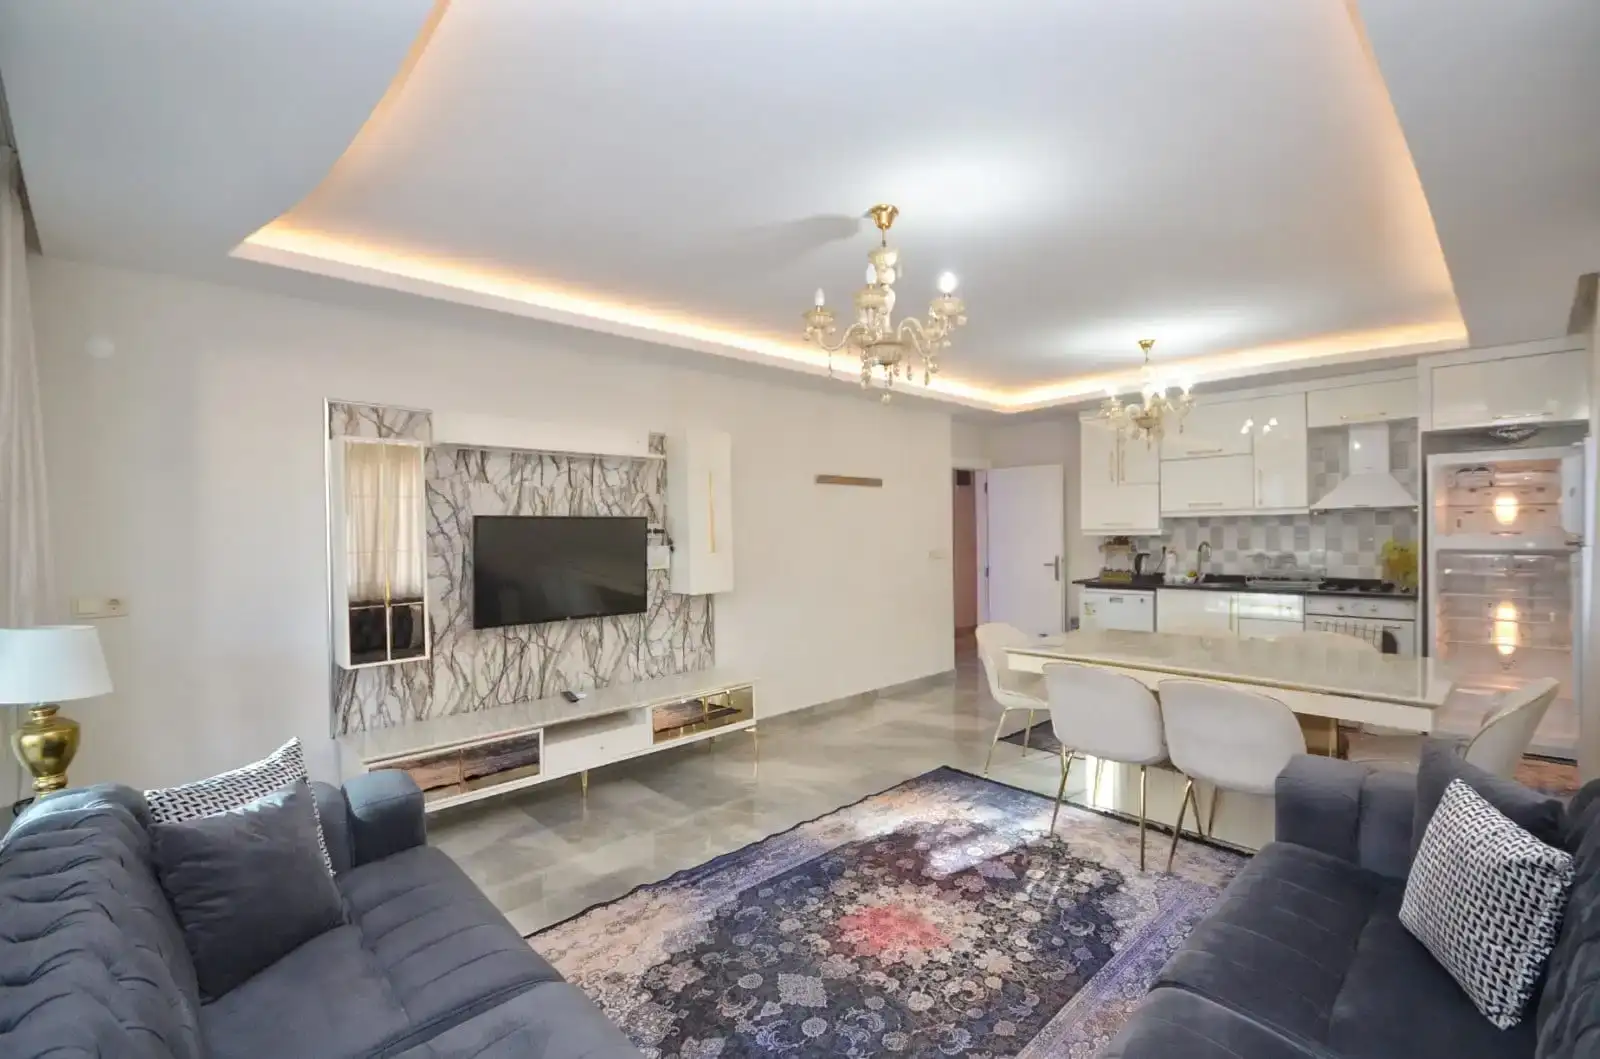 2+1 APARTMENT FOR SALE İN THE CİTY CENTER-CLOSE TO ALL SHOPPİNG CENTER